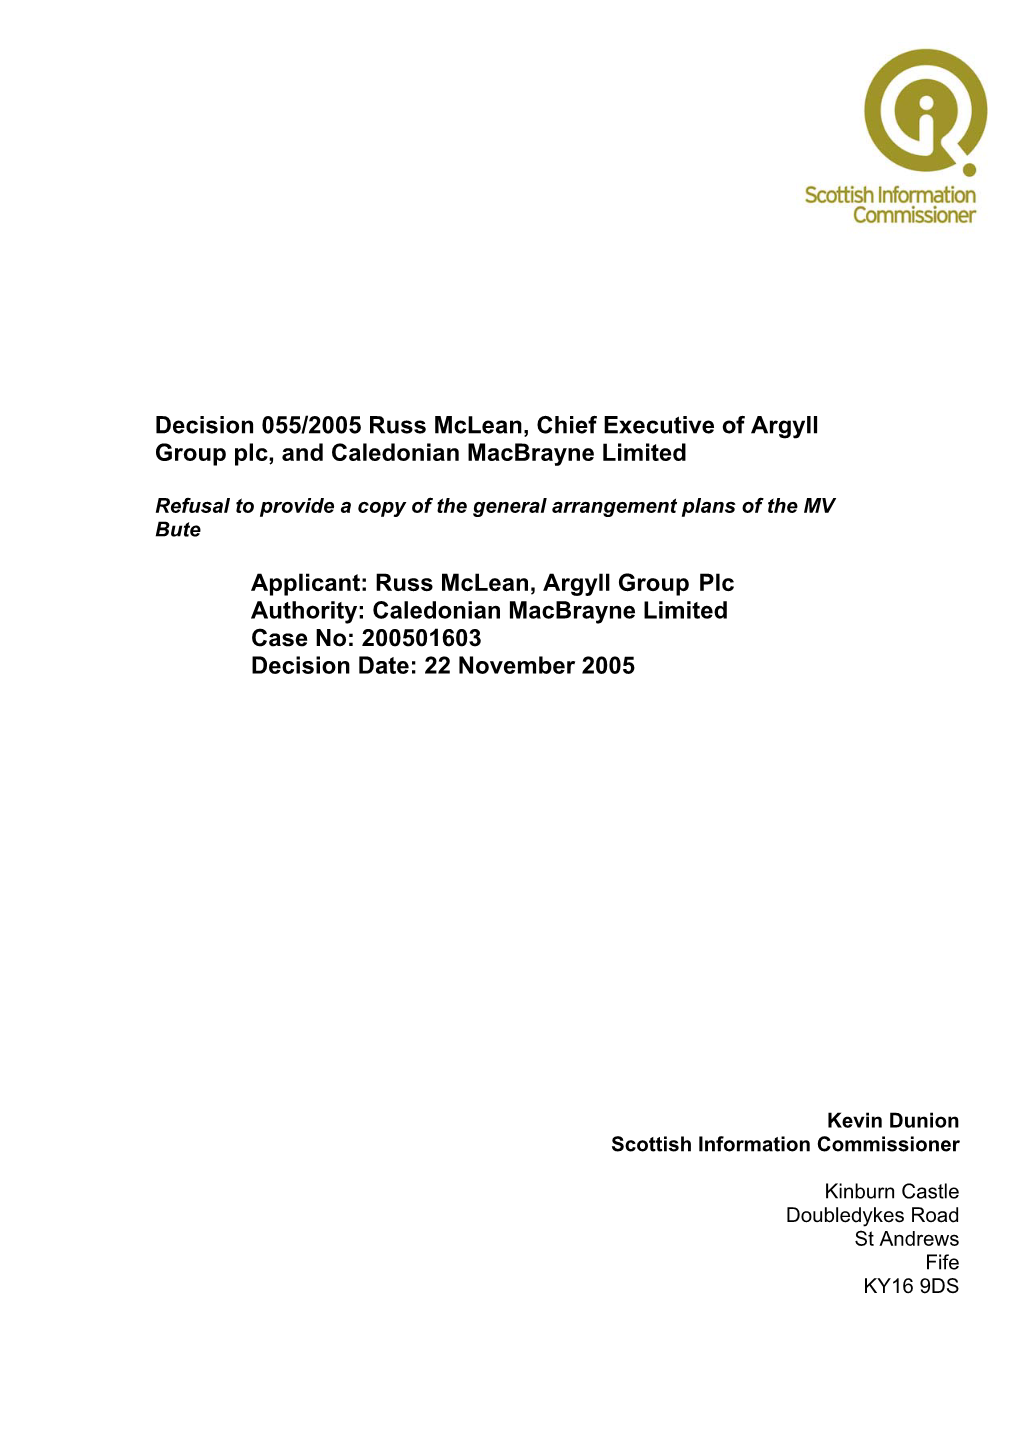 Link to PDF File of Decision 055/2005